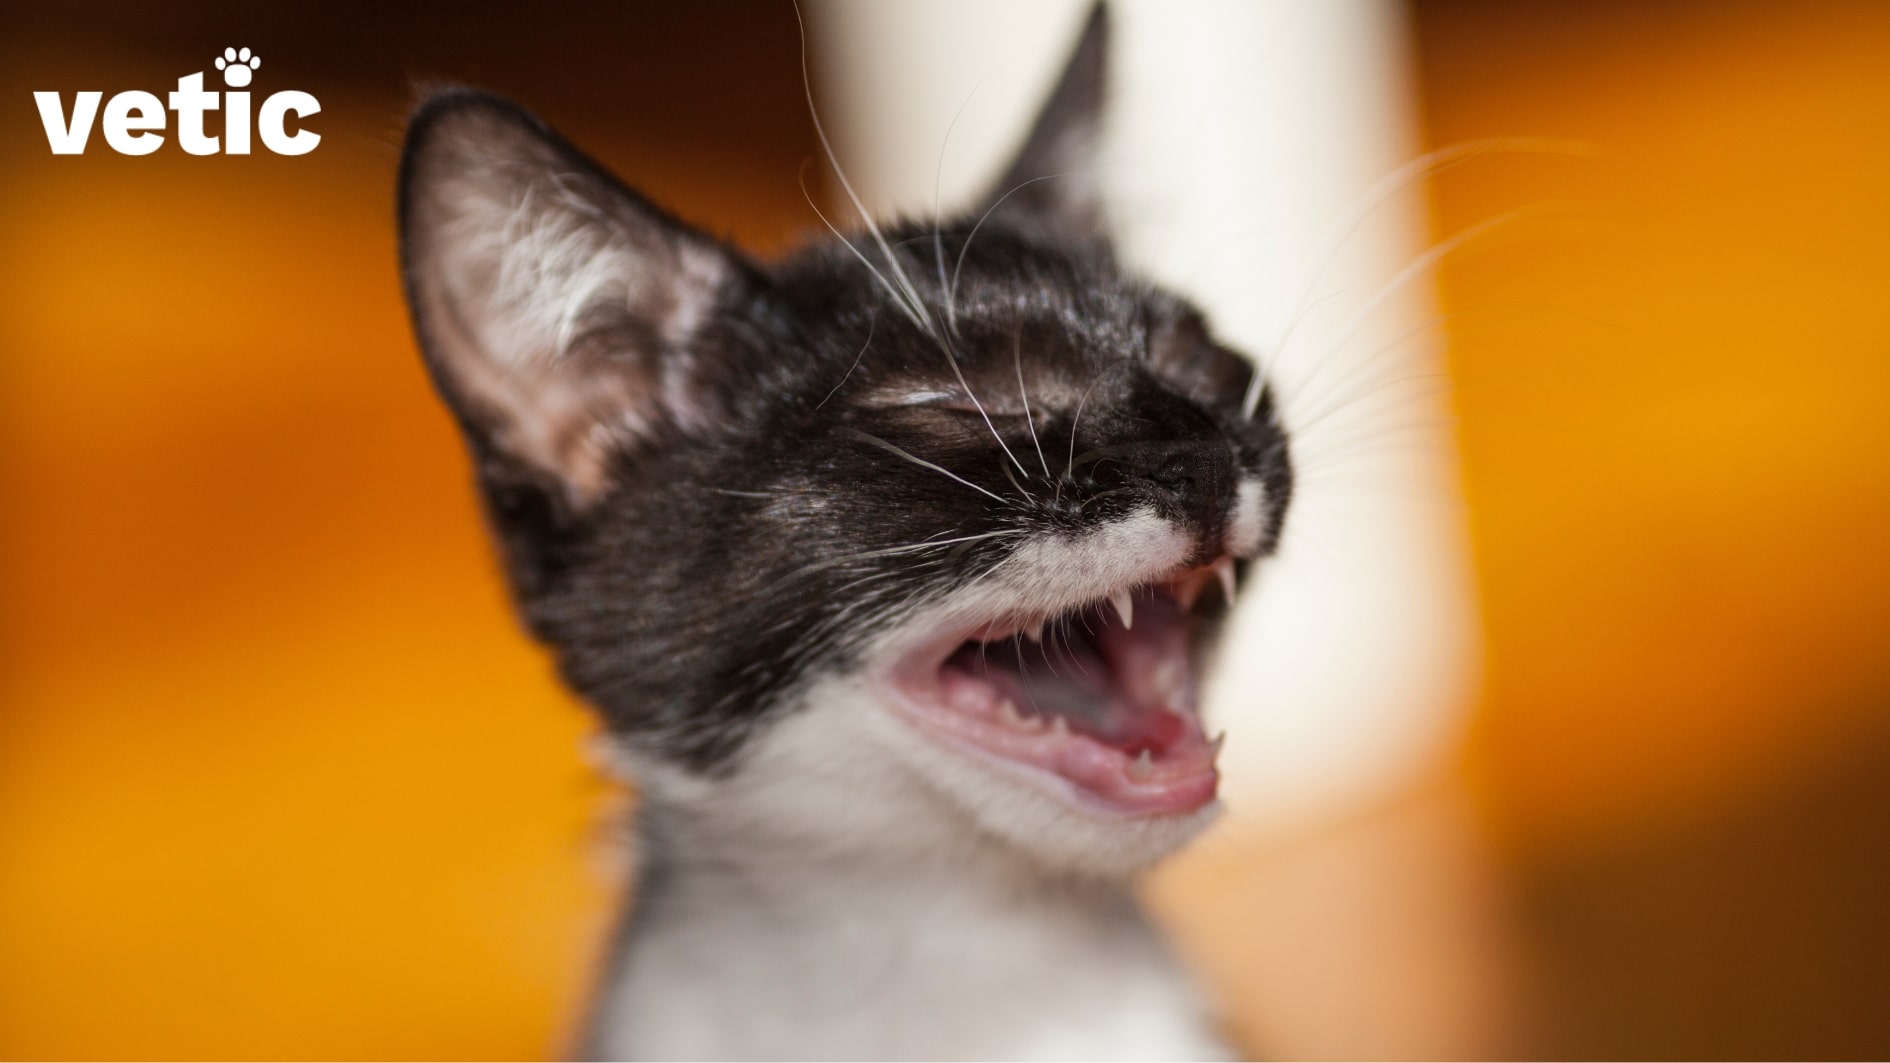 Close up of a kitten with a black head and face, but white neck and chest. Only up to the neck-chest area visible. the kitten has their eyes closed and mouth opened. panting in cats can be caused by excess stress, high temperature, pain and more.